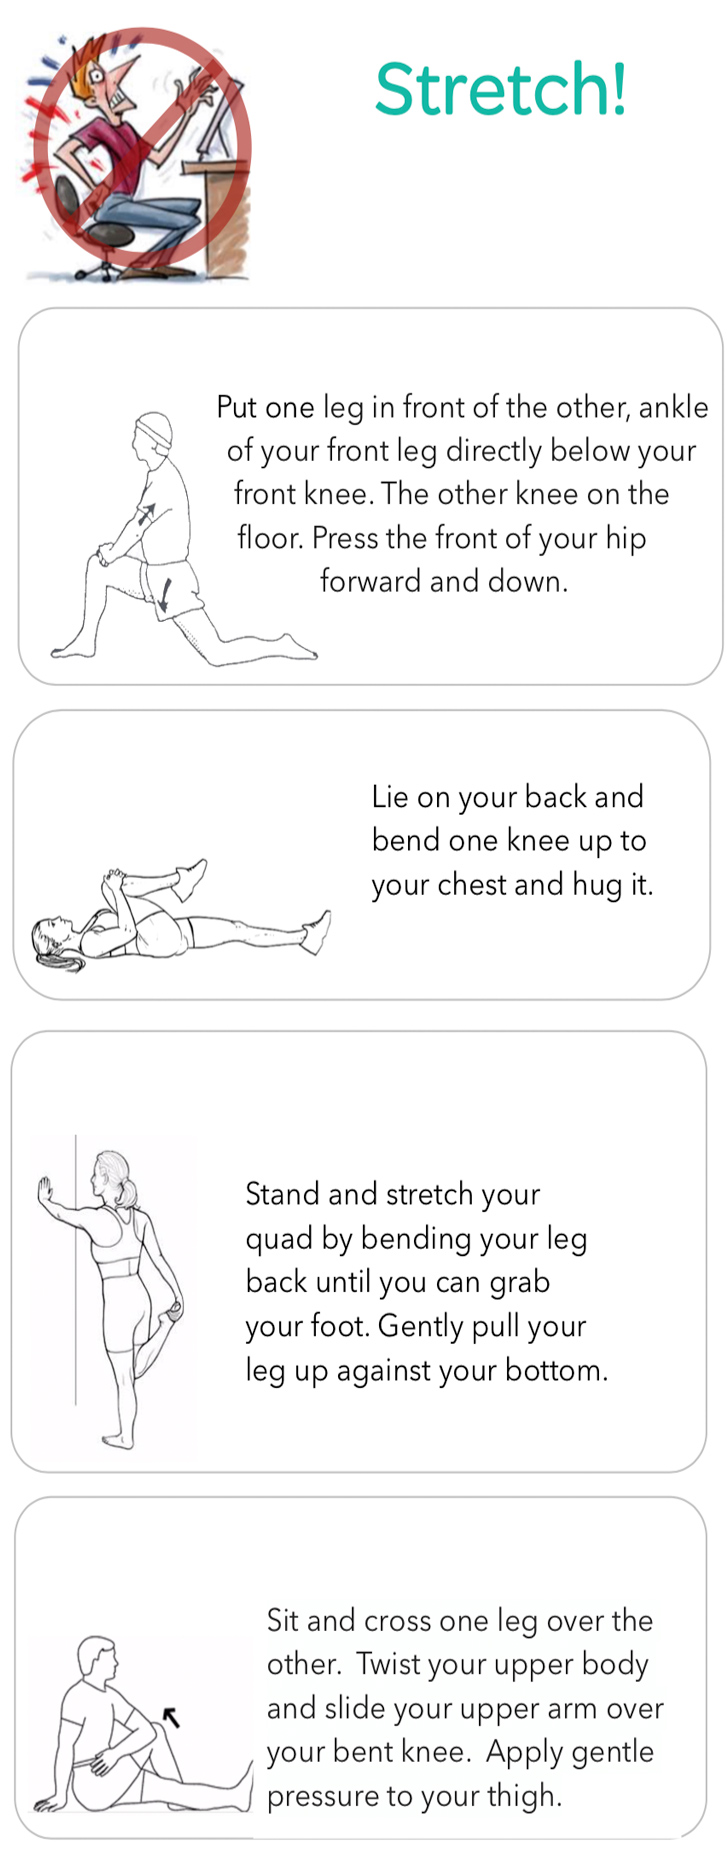 Stretch Exercise